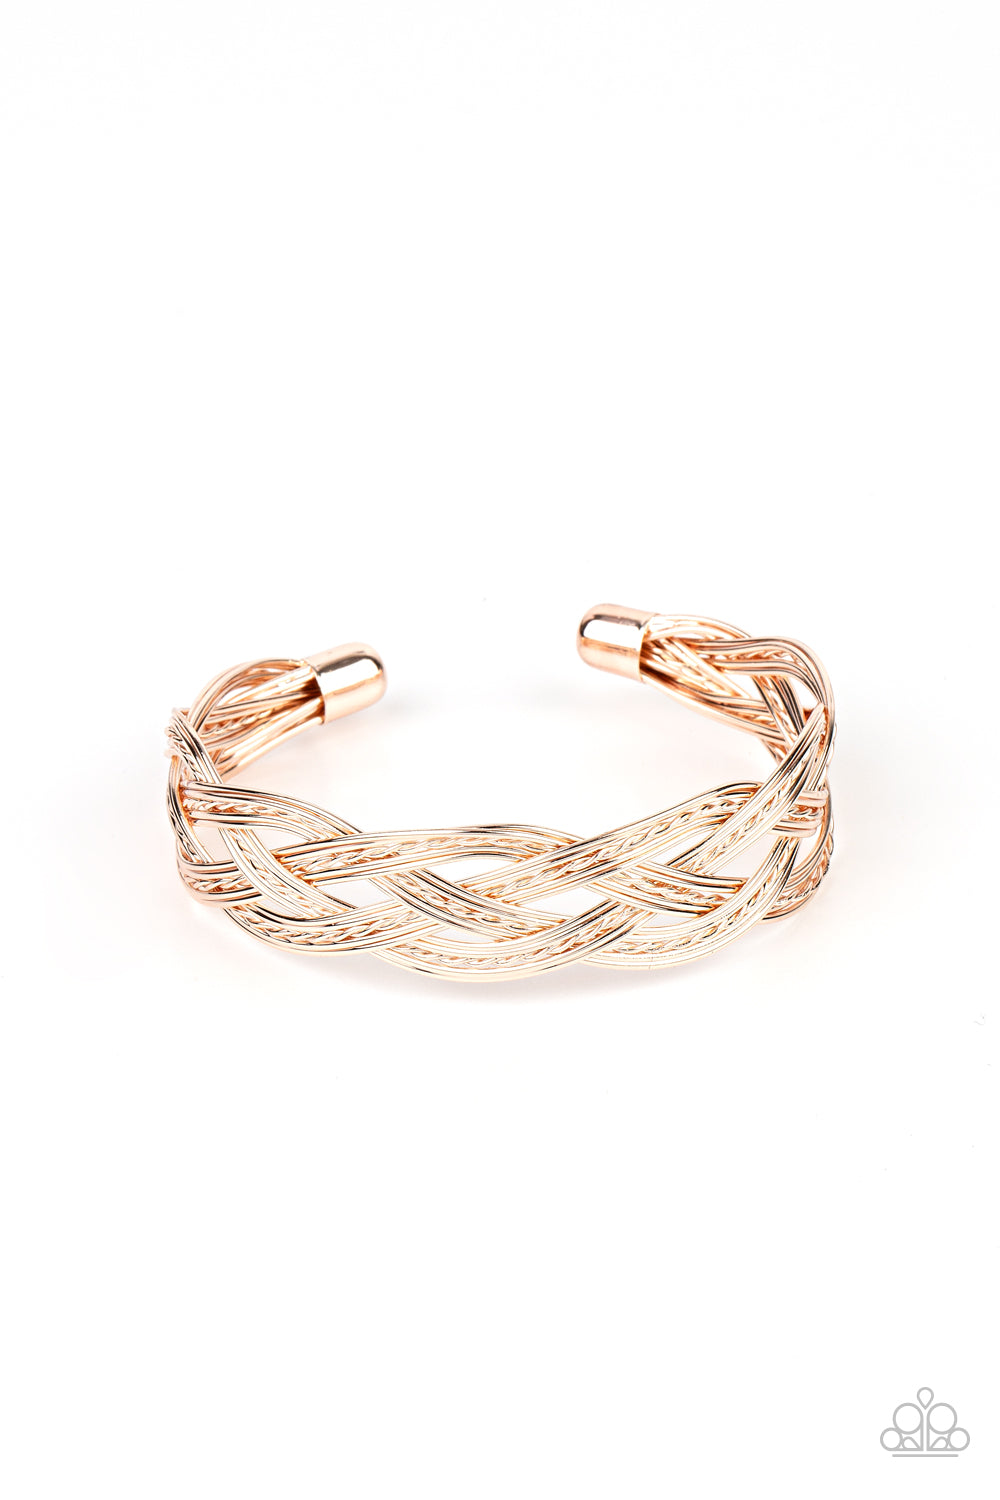 Get Your Wires Crossed - rose gold - Paparazzi bracelet